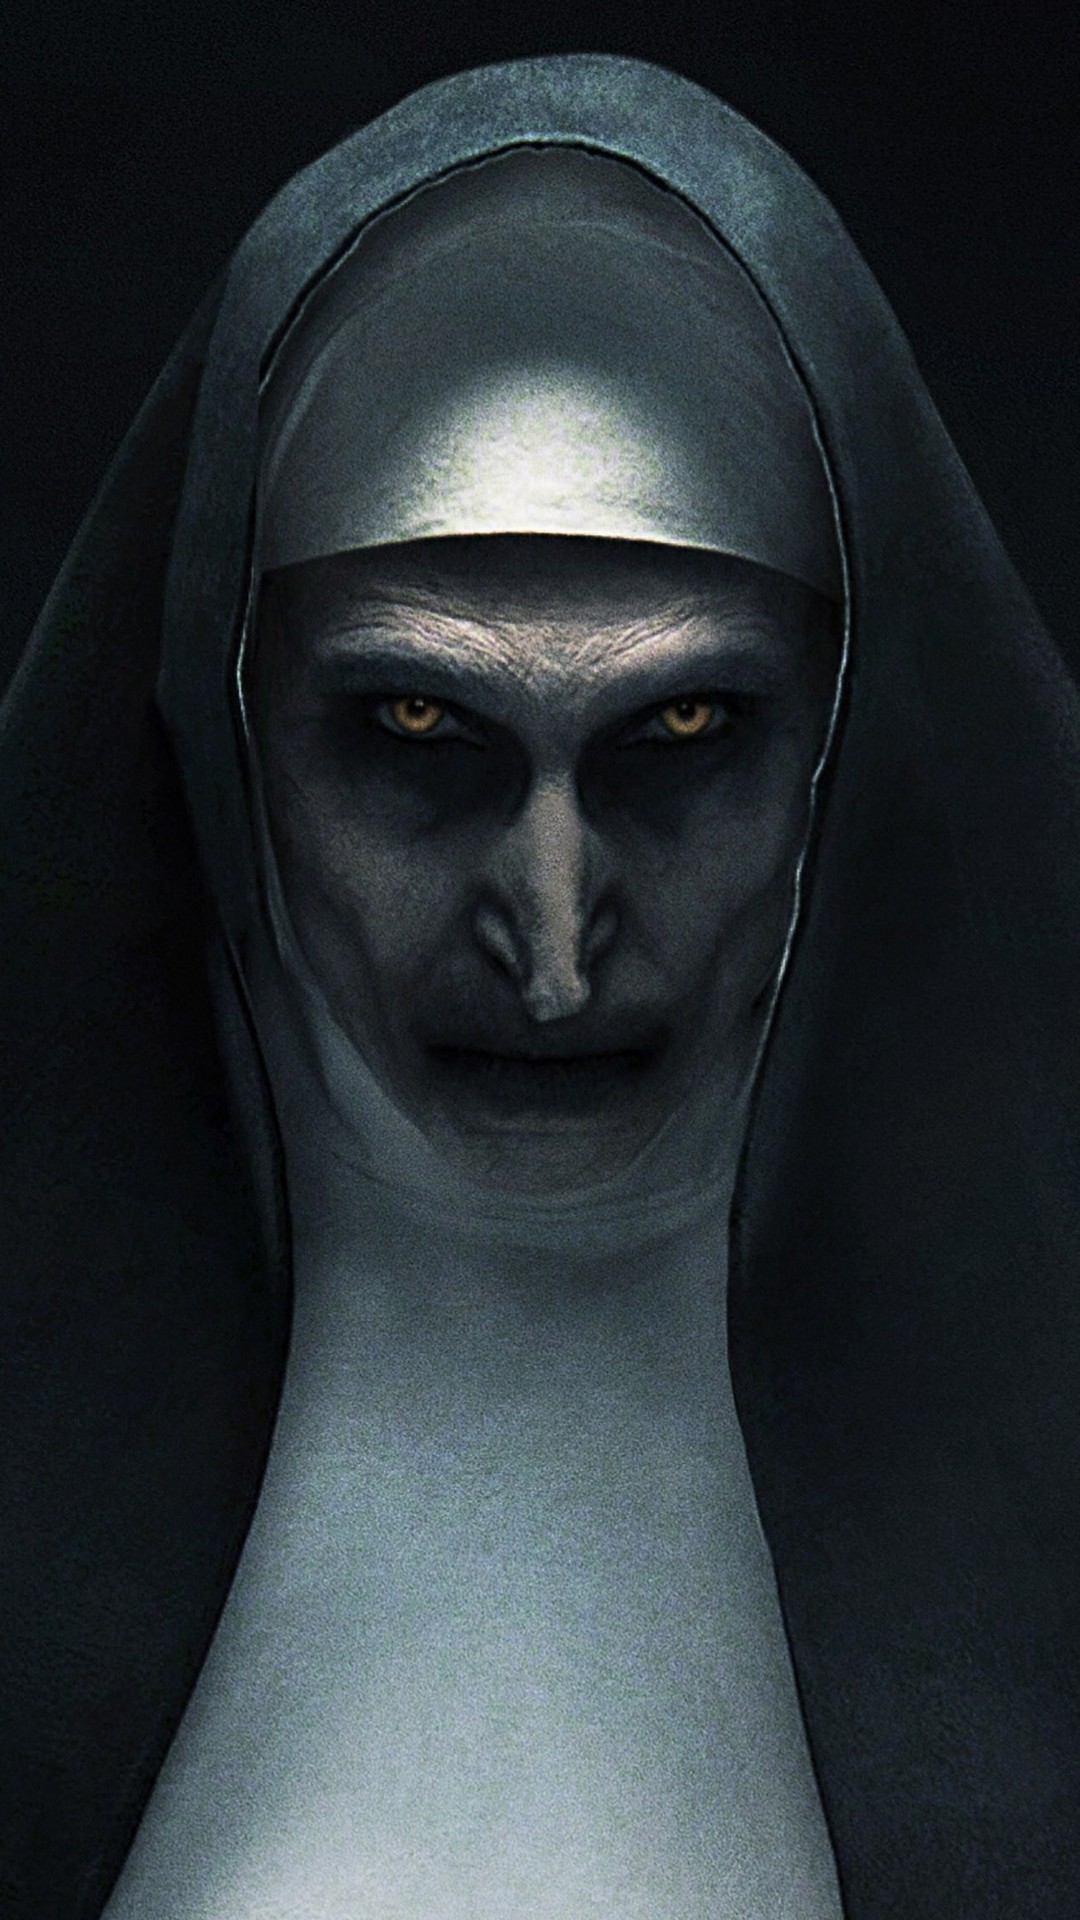 The Nun Wallpaper iPhone with resolution 1080X1920 pixel. You can make this wallpaper for your iPhone 5, 6, 7, 8, X backgrounds, Mobile Screensaver, or iPad Lock Screen